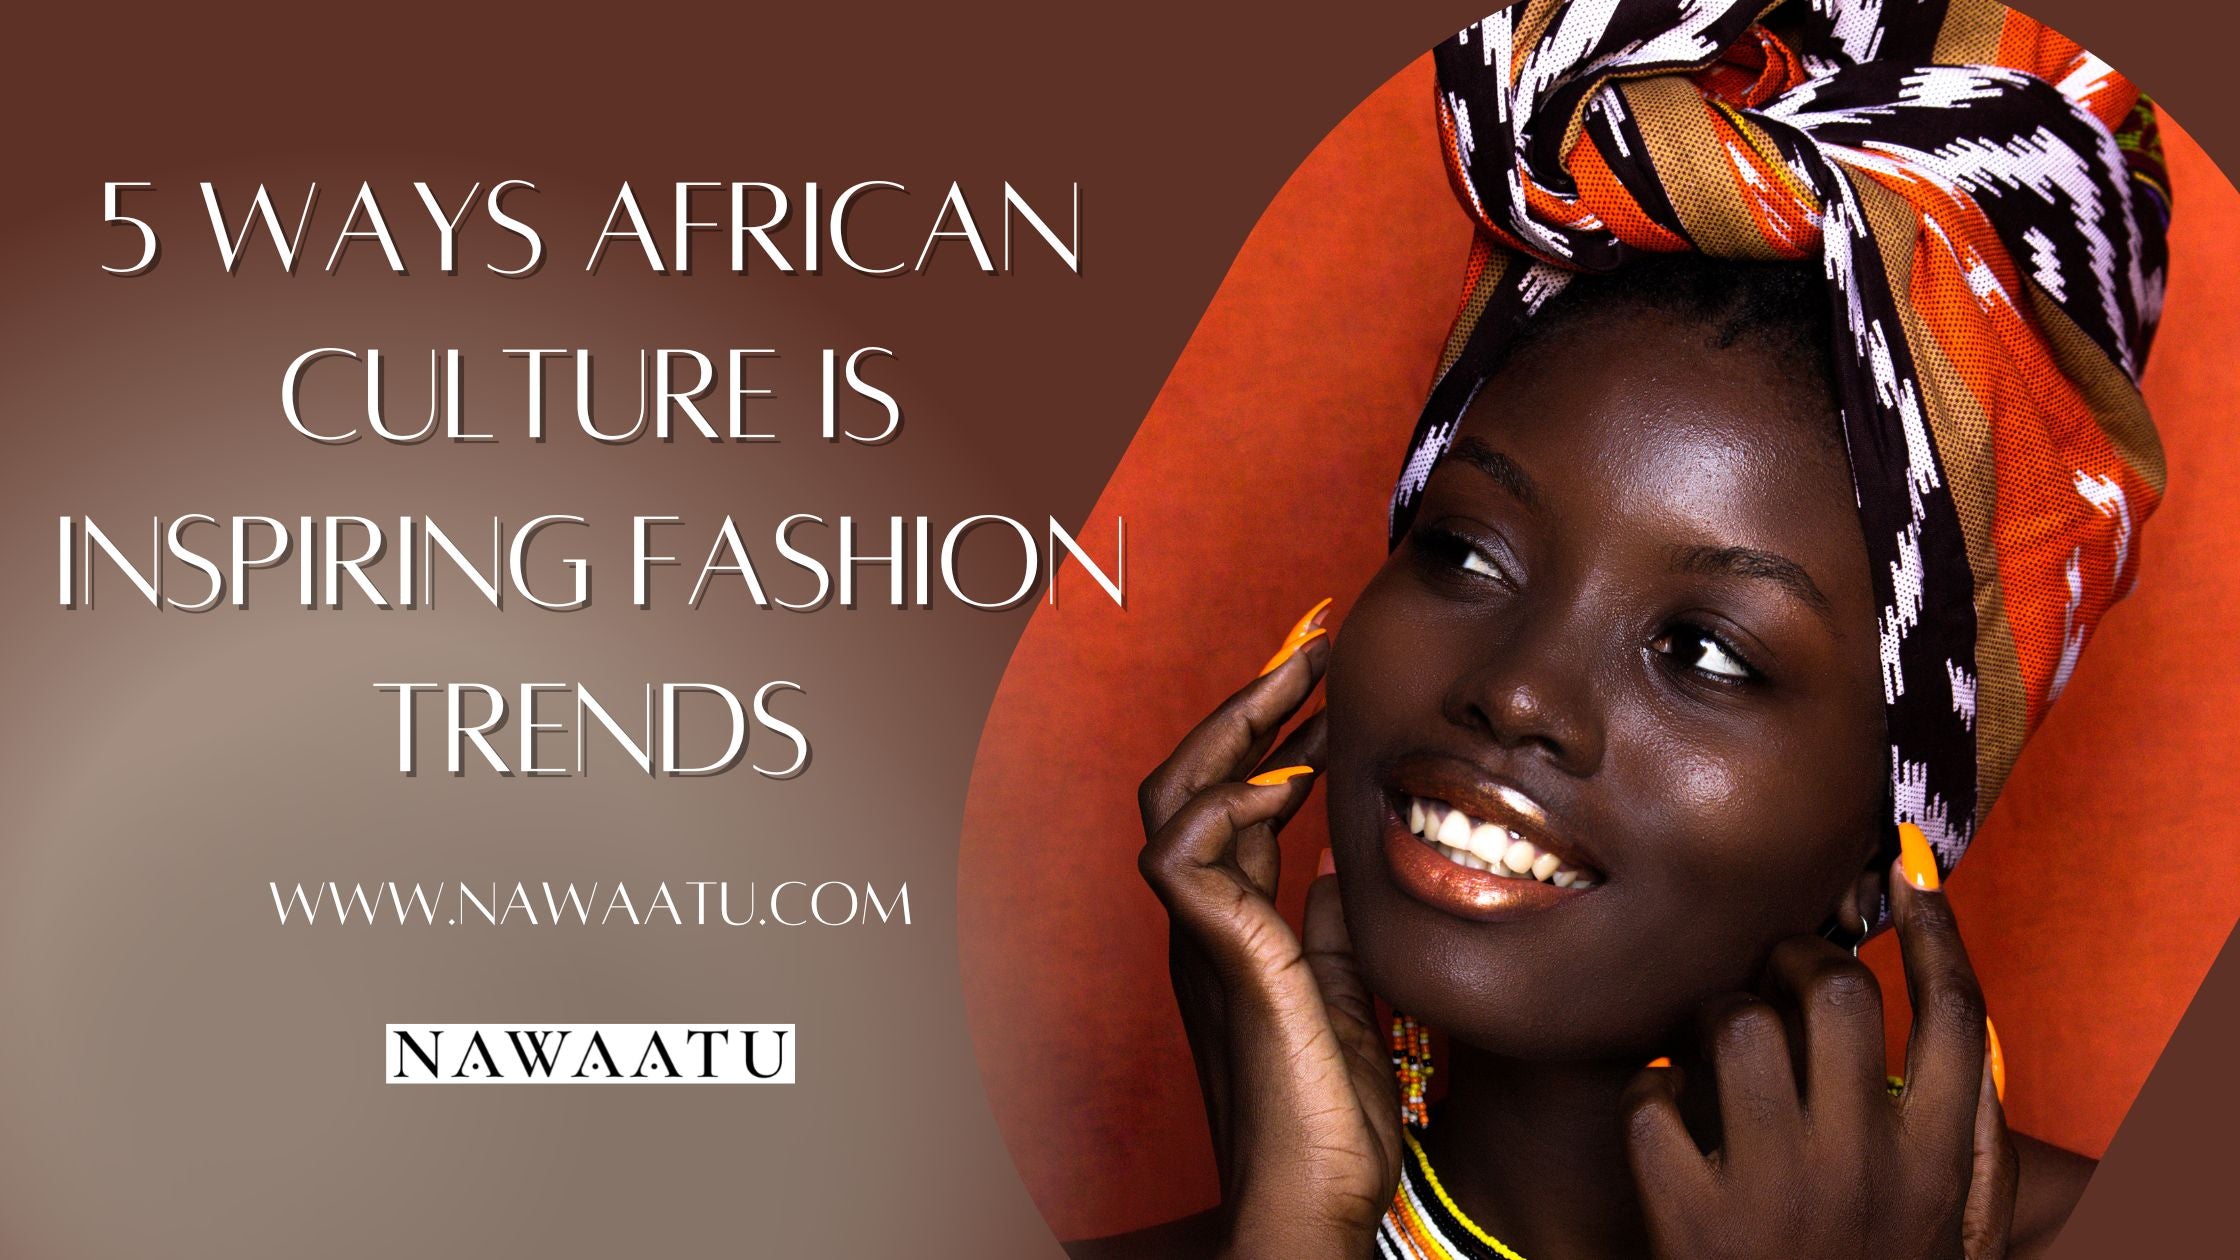 5 WAYS AFRICAN CULTURE IS INSPIRING FASHION TRENDS